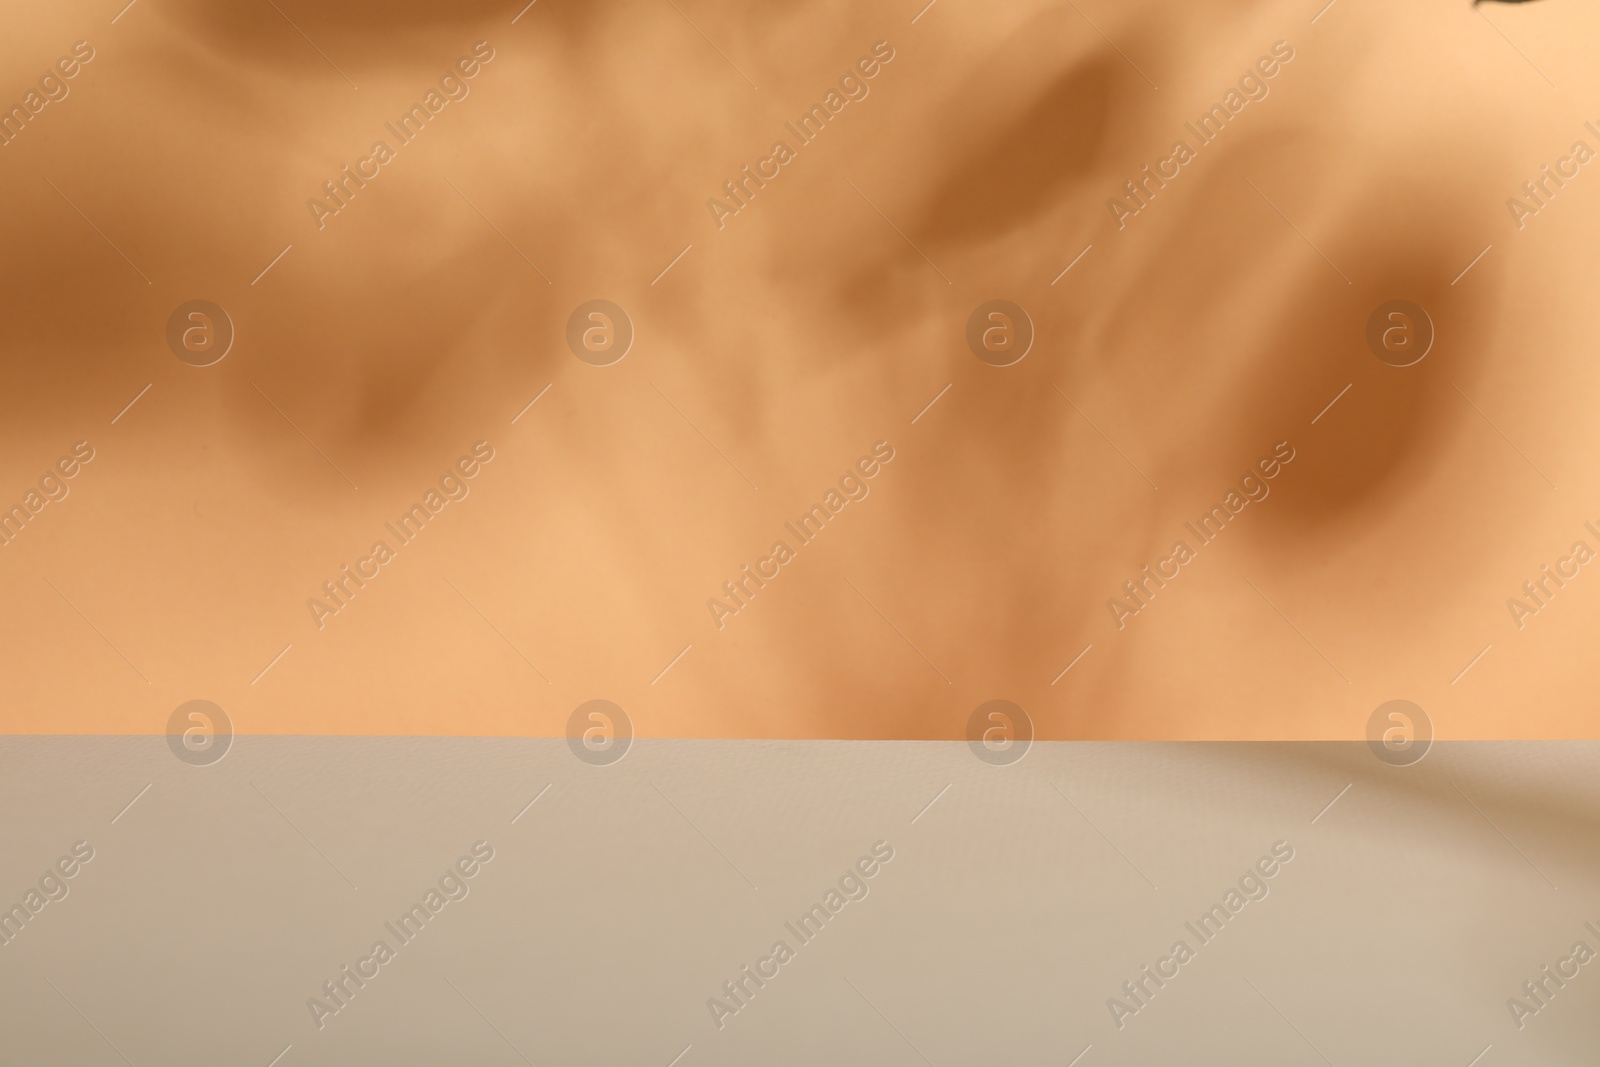 Photo of Presentation of product. Shadows on orange background. Space for text